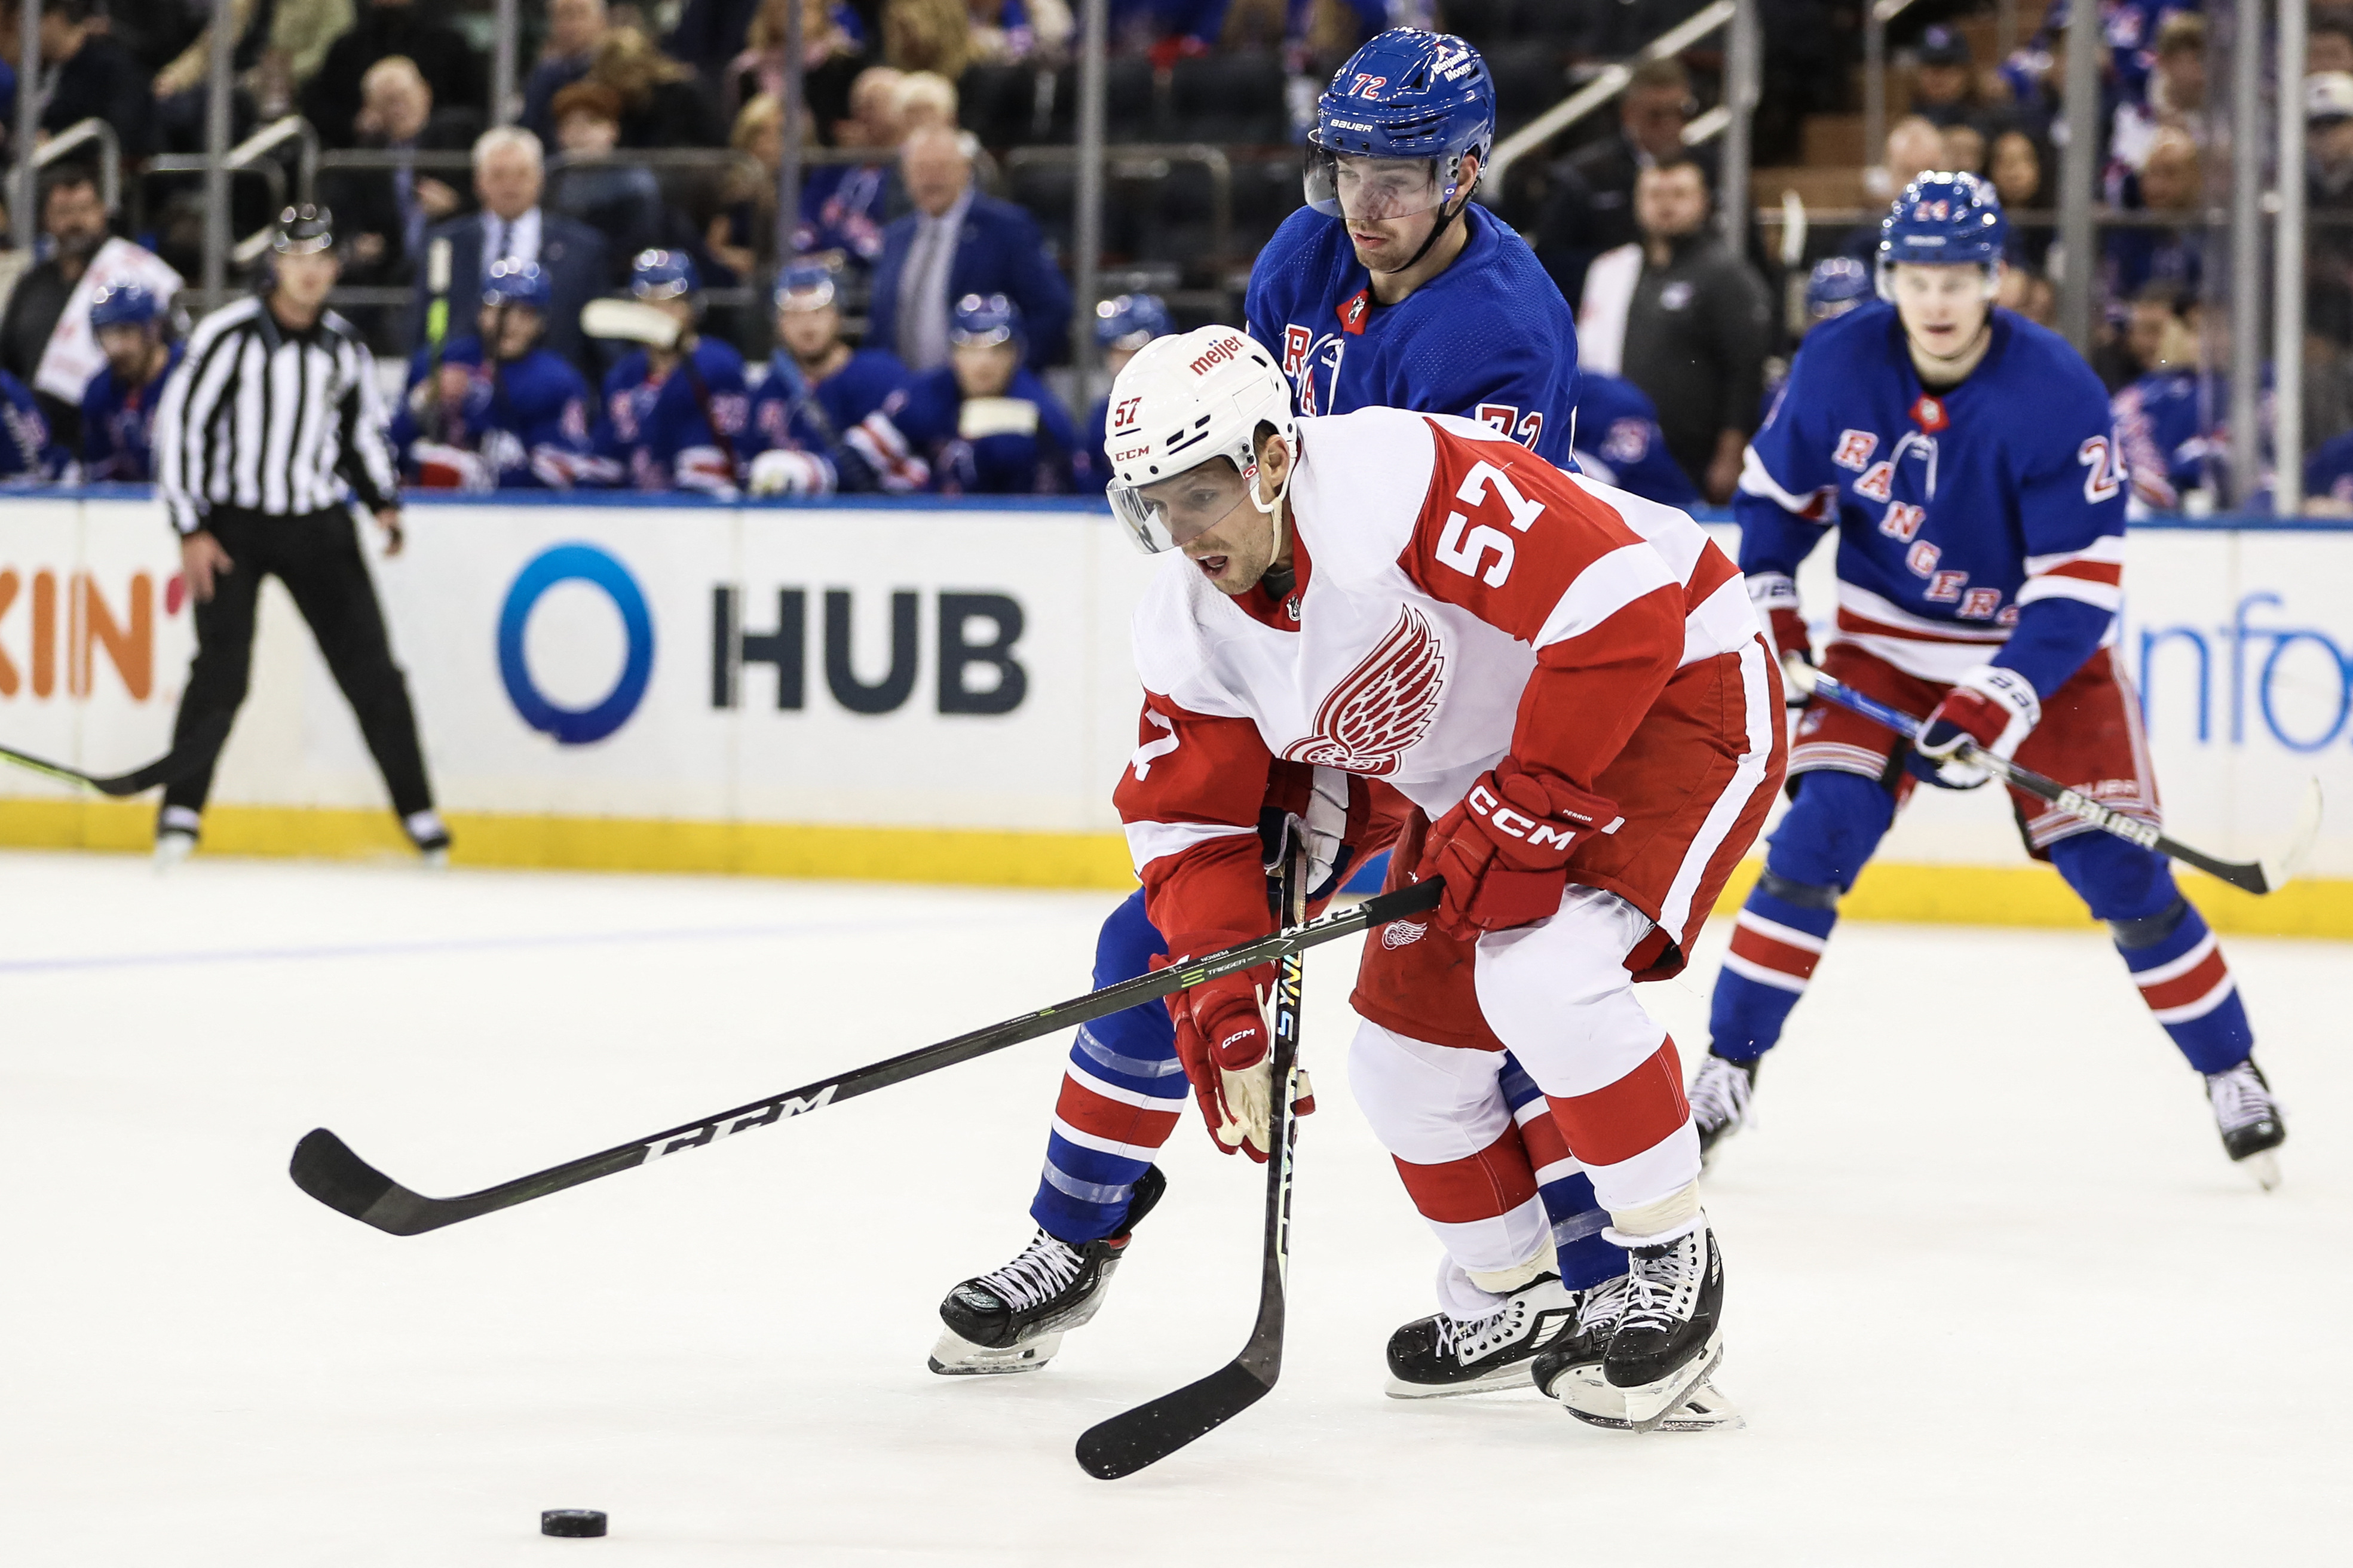 Kubalik scores in OT to give Red Wings 3-2 win over Rangers